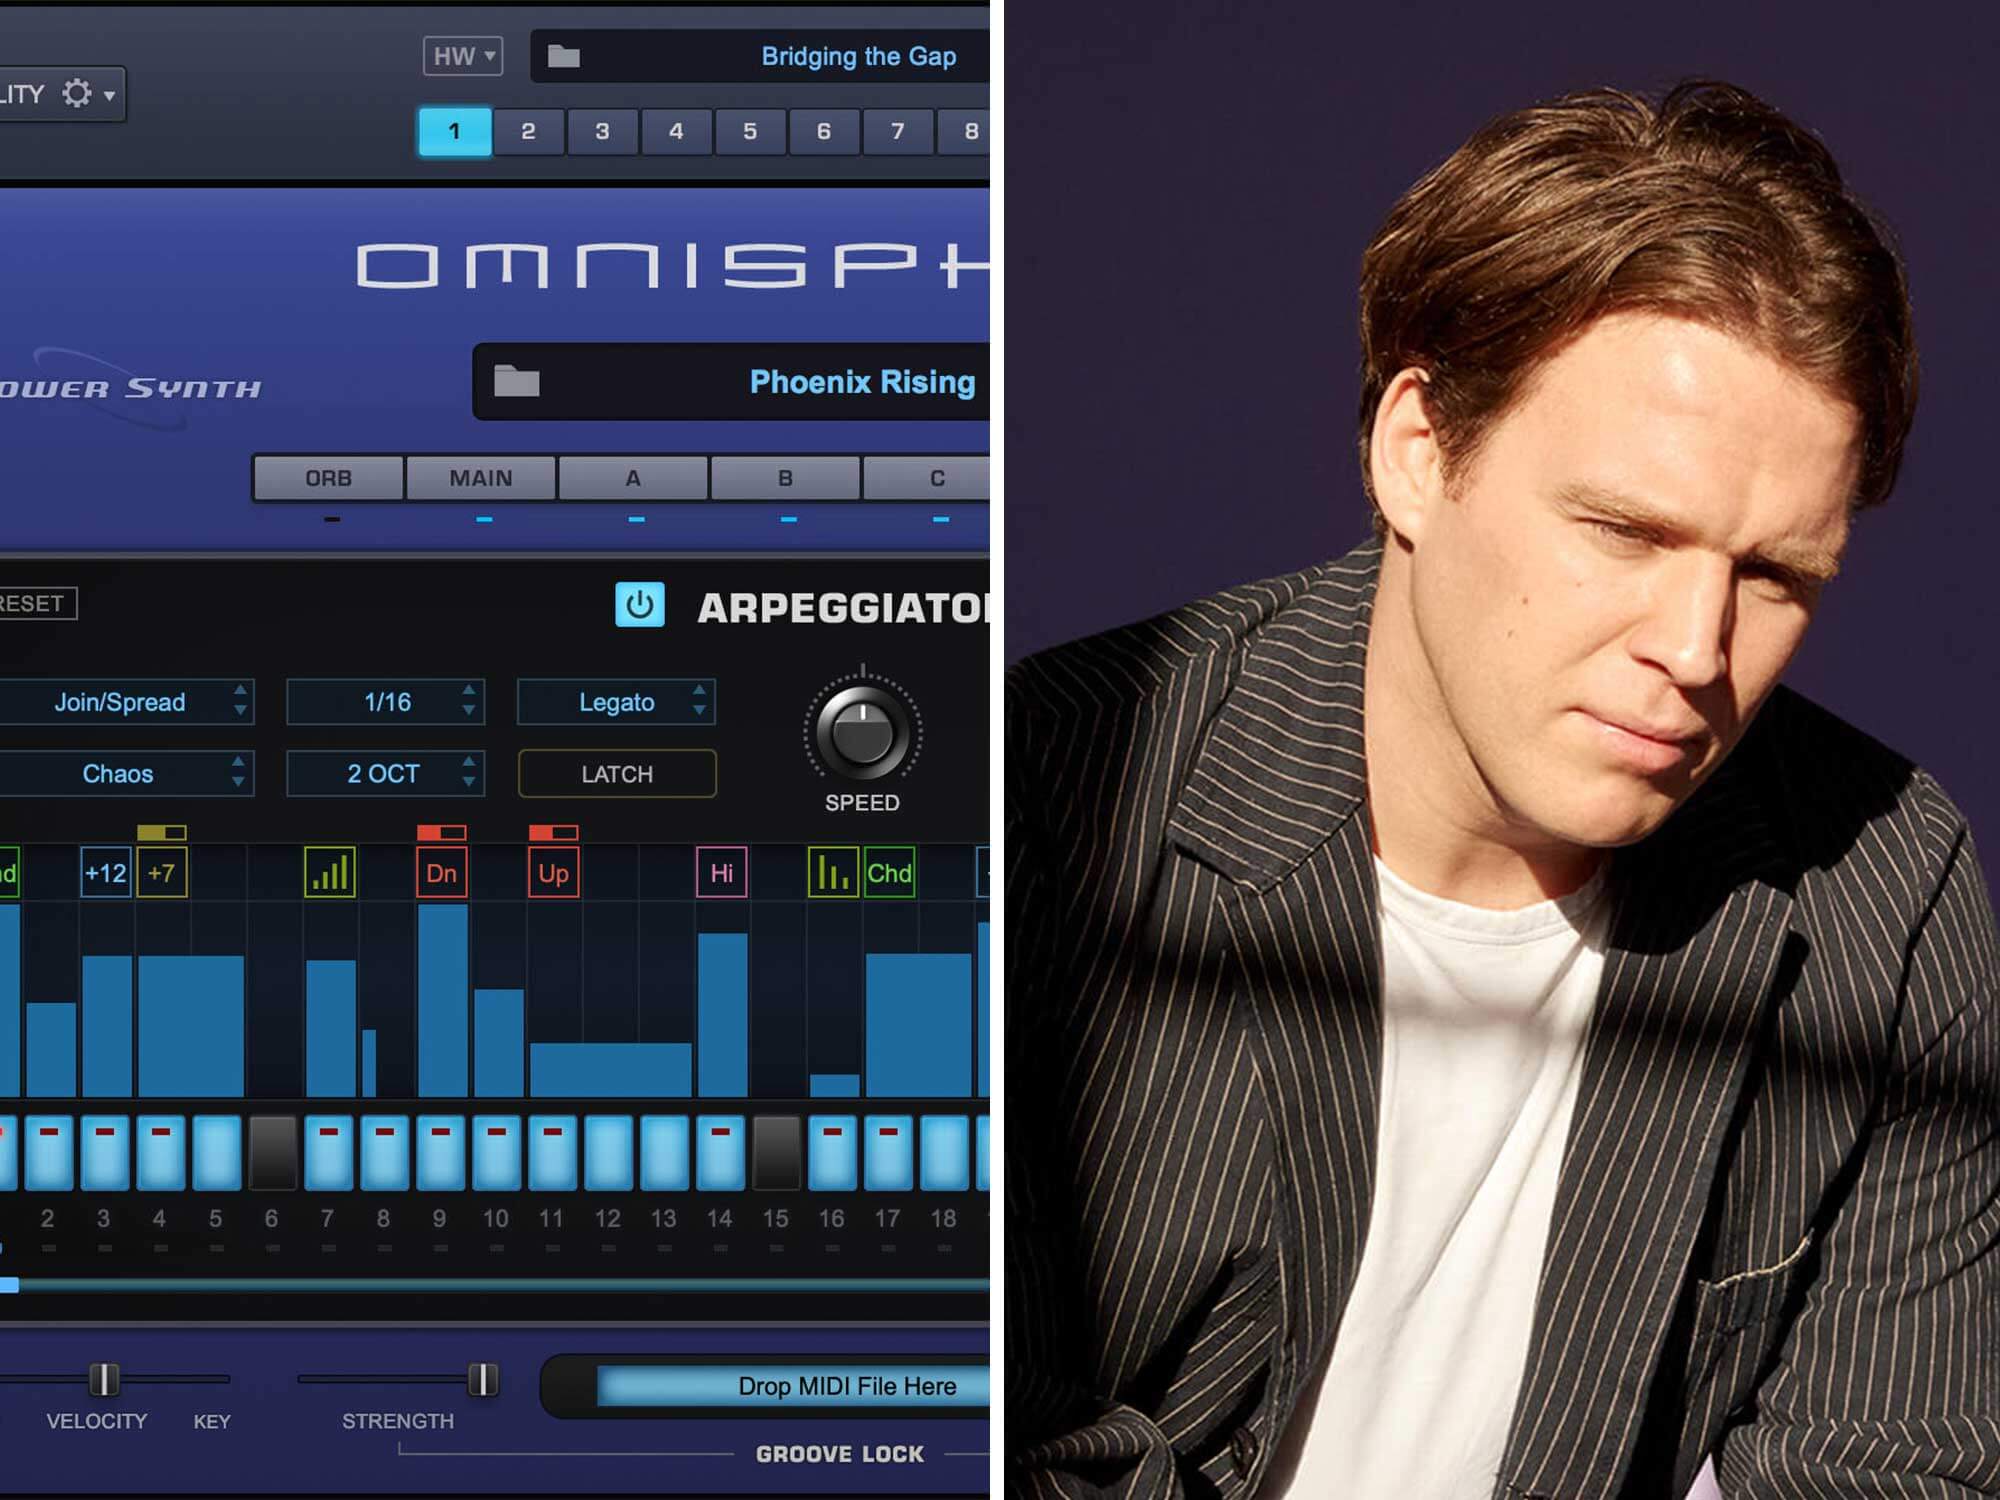 The Spectrasonics Omnisphere plugin on the left, and musican Tourist sat down on the right